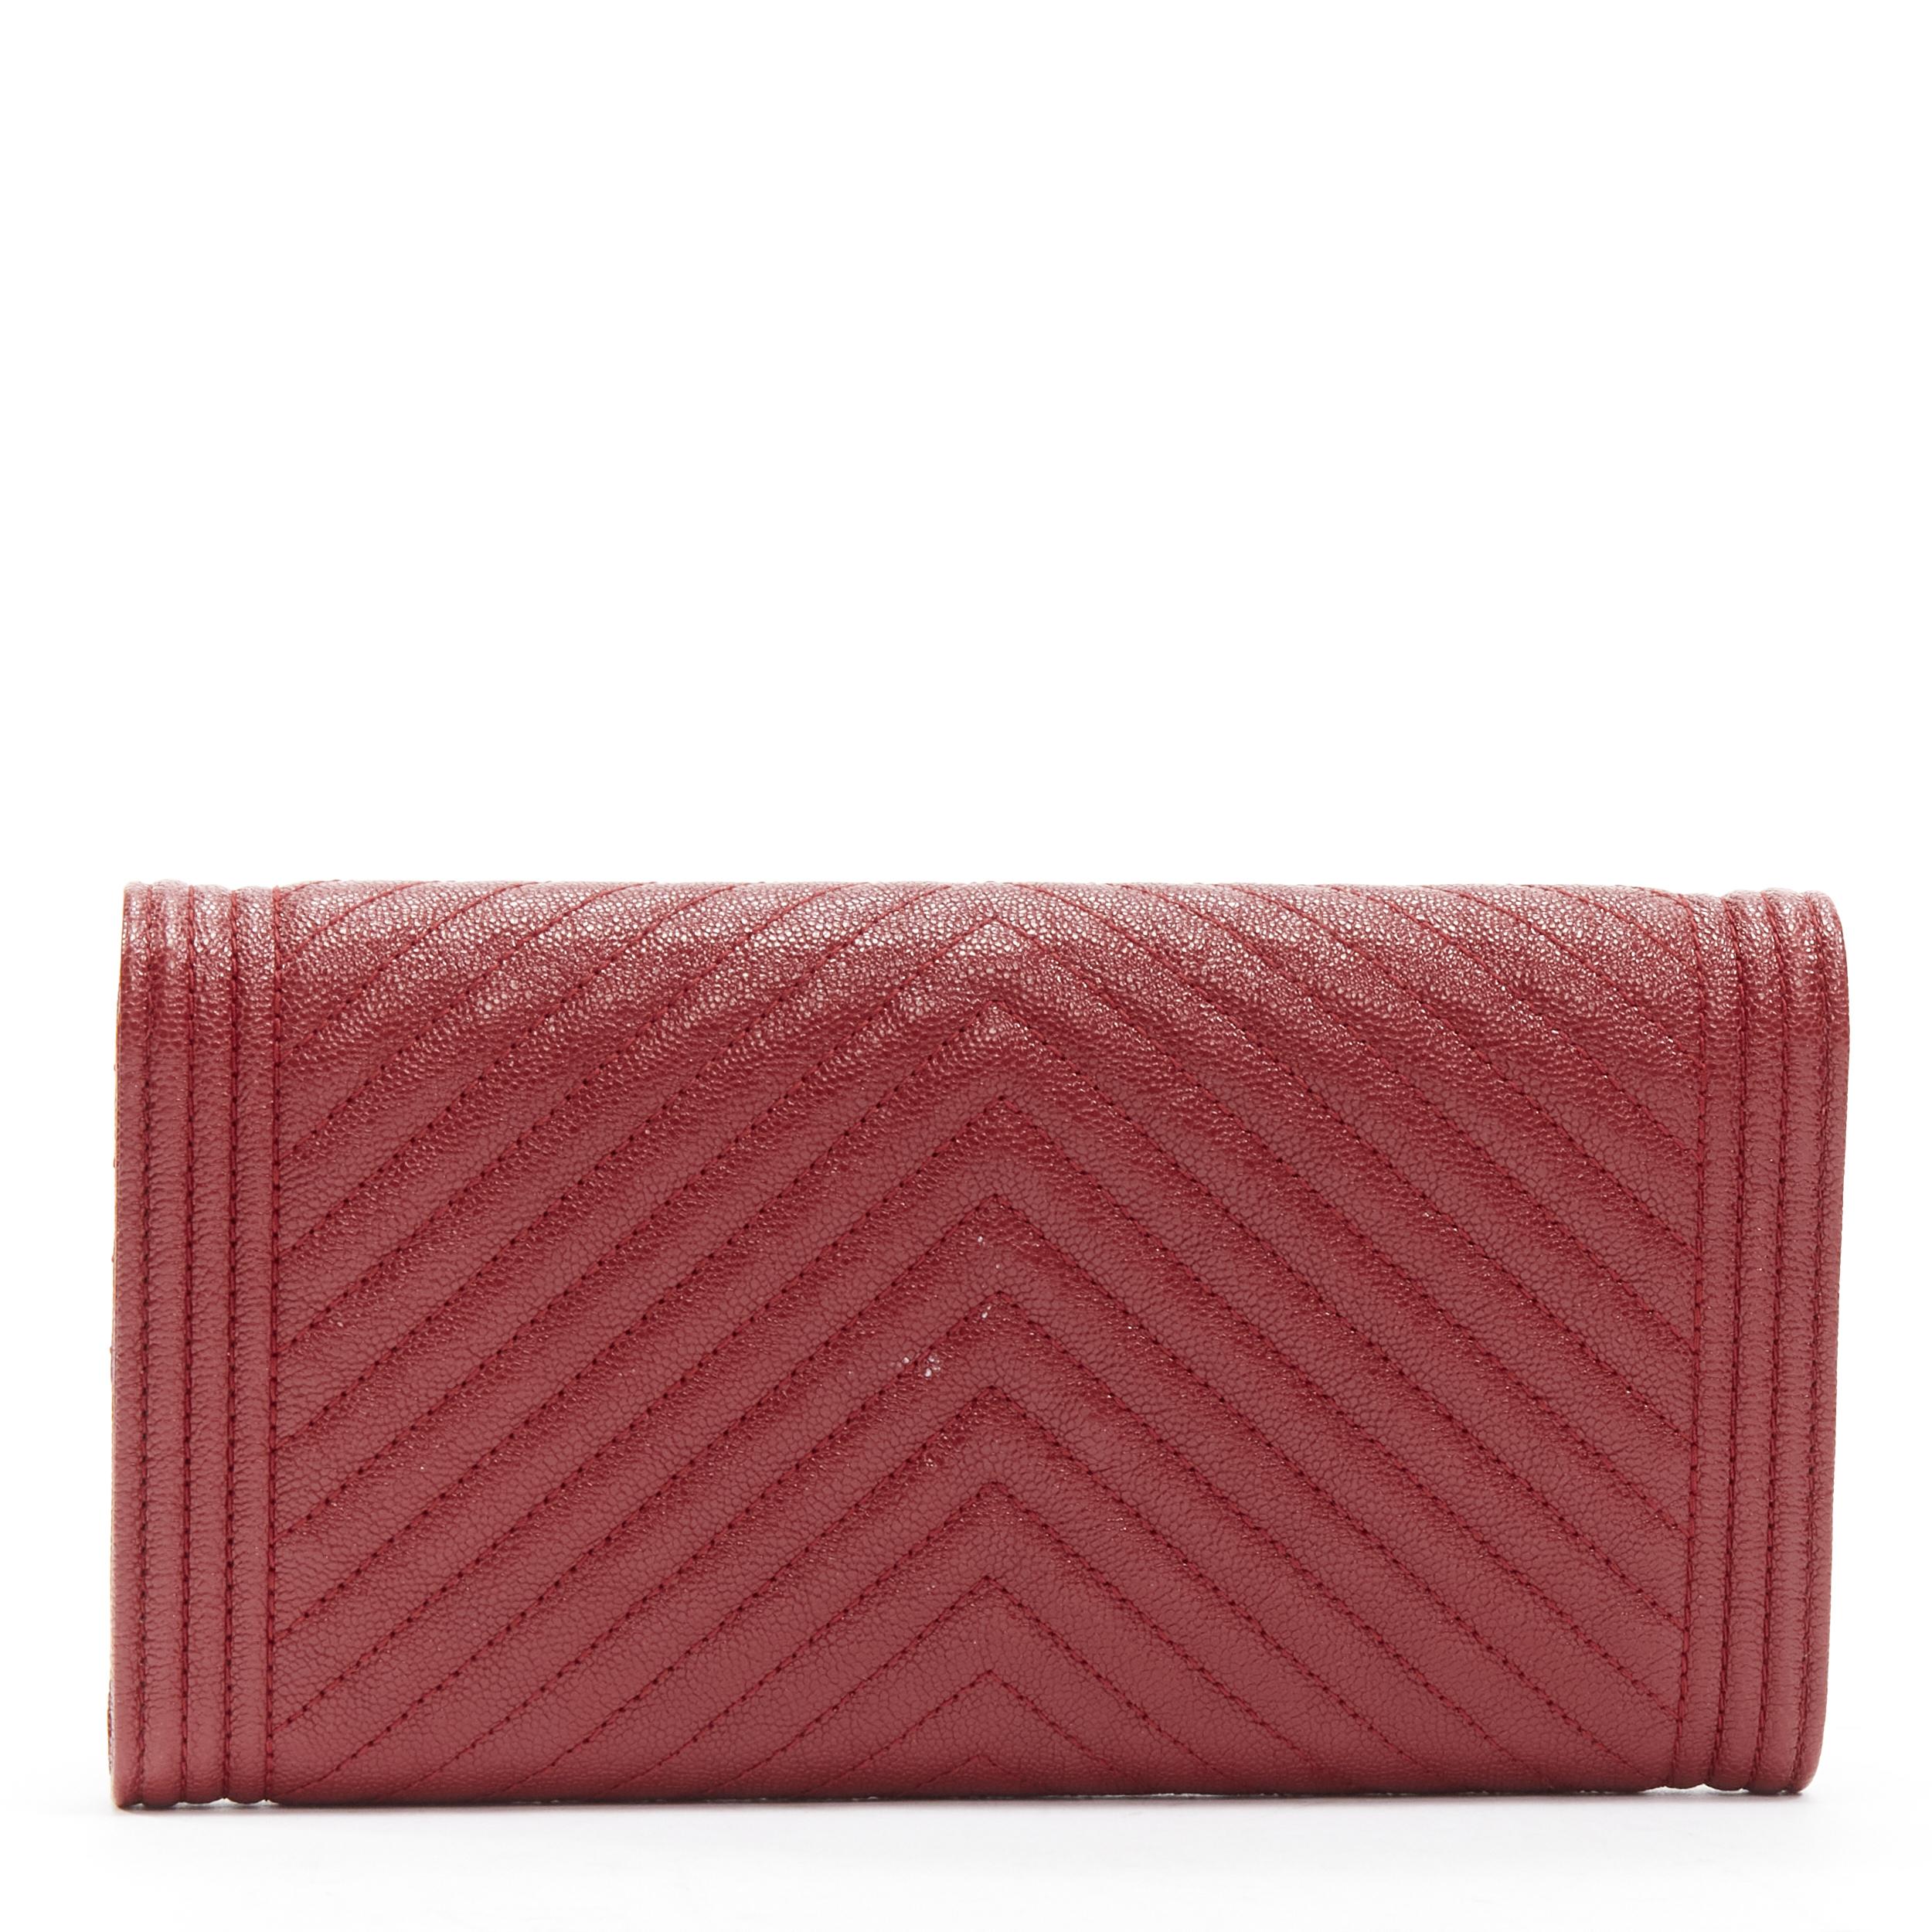 new CHANEL Boy chevron red caviar gold CC logo flap long wallet In New Condition For Sale In Hong Kong, NT